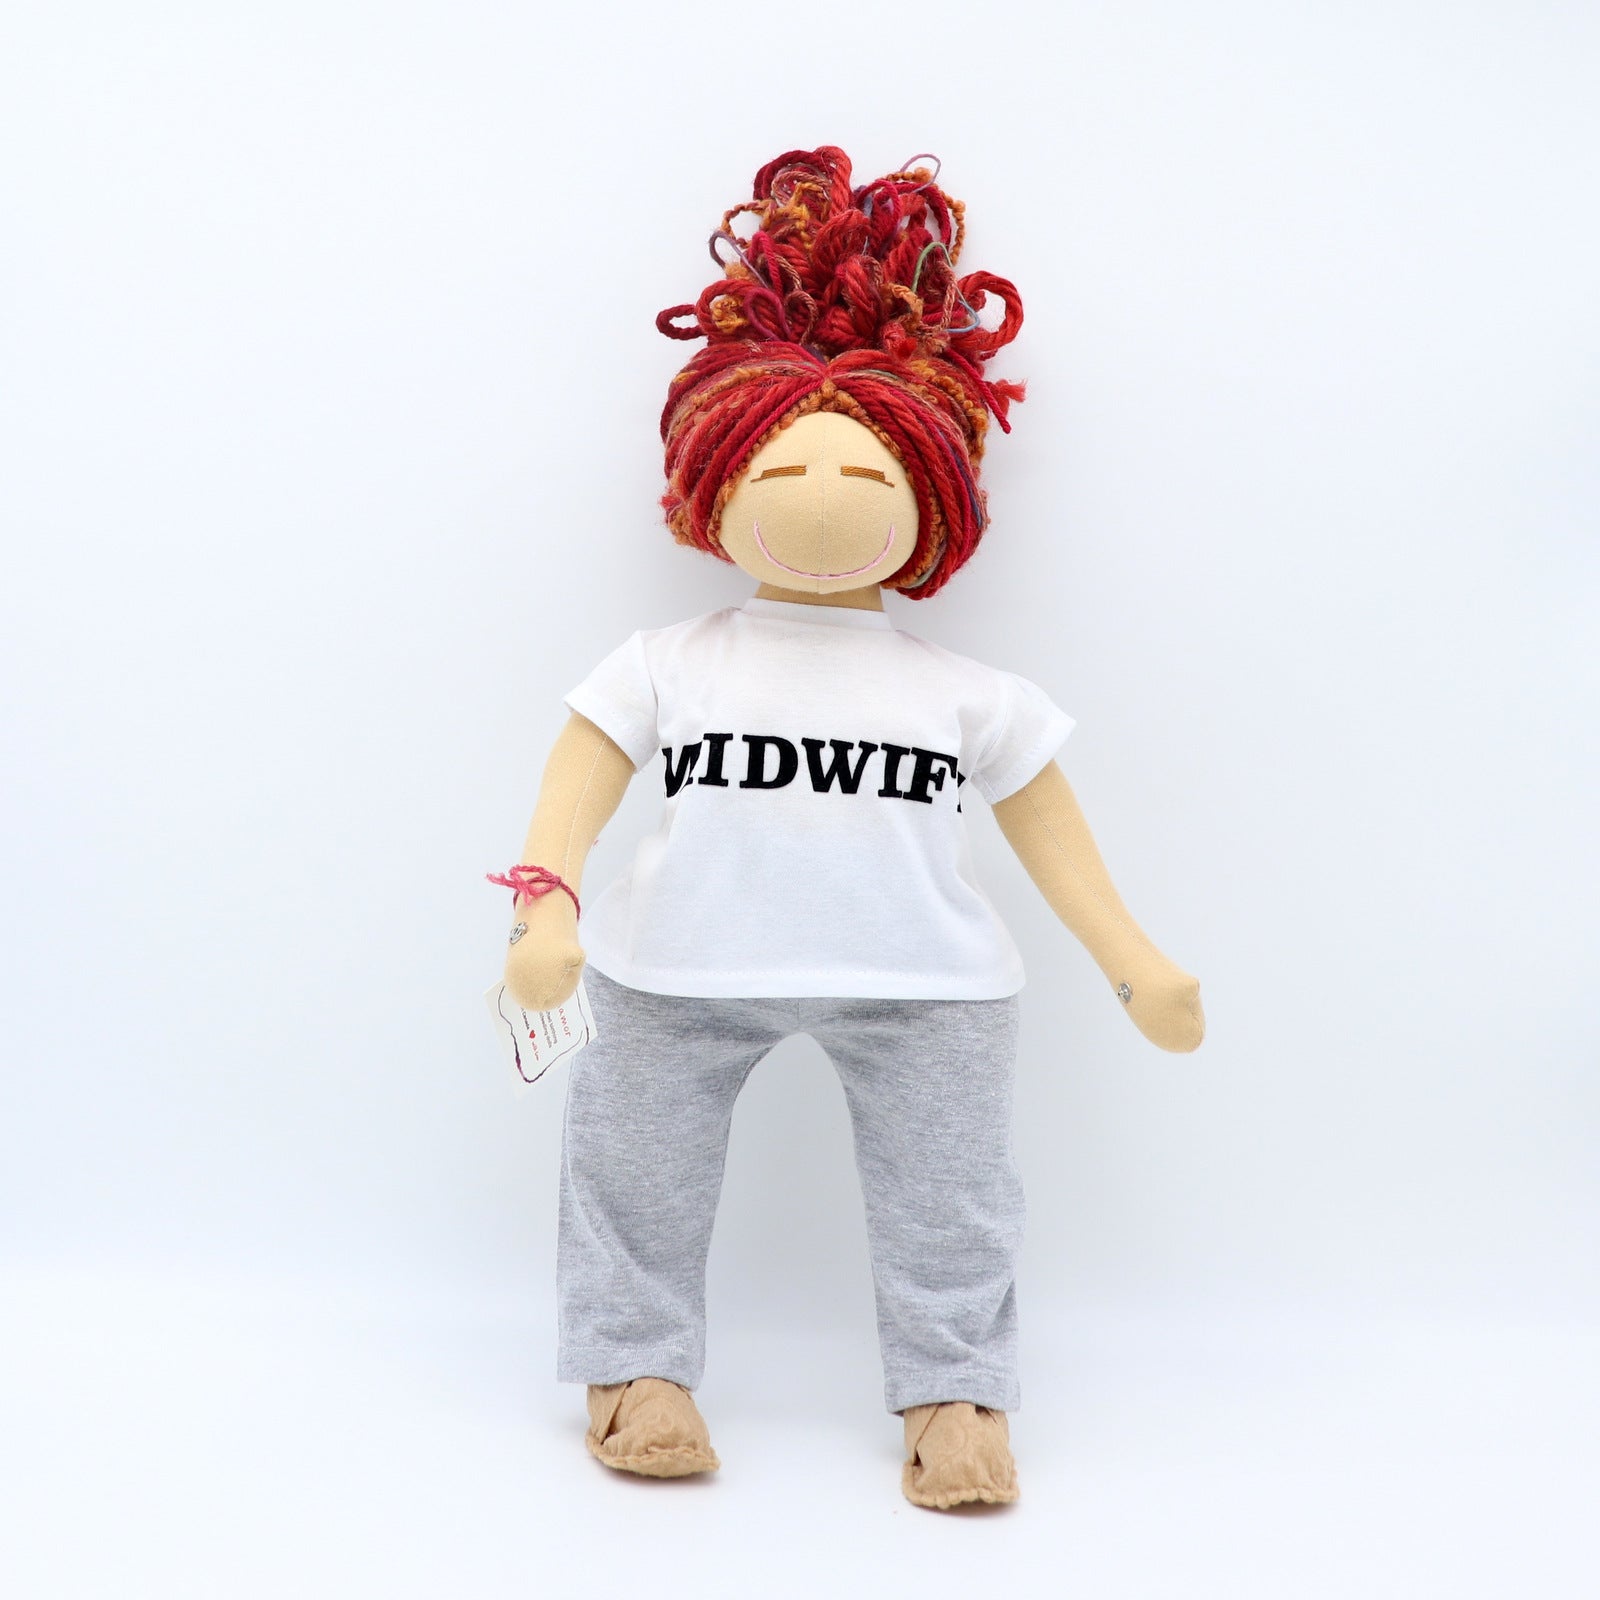 Midwife Doll + Accessories (Option 3)